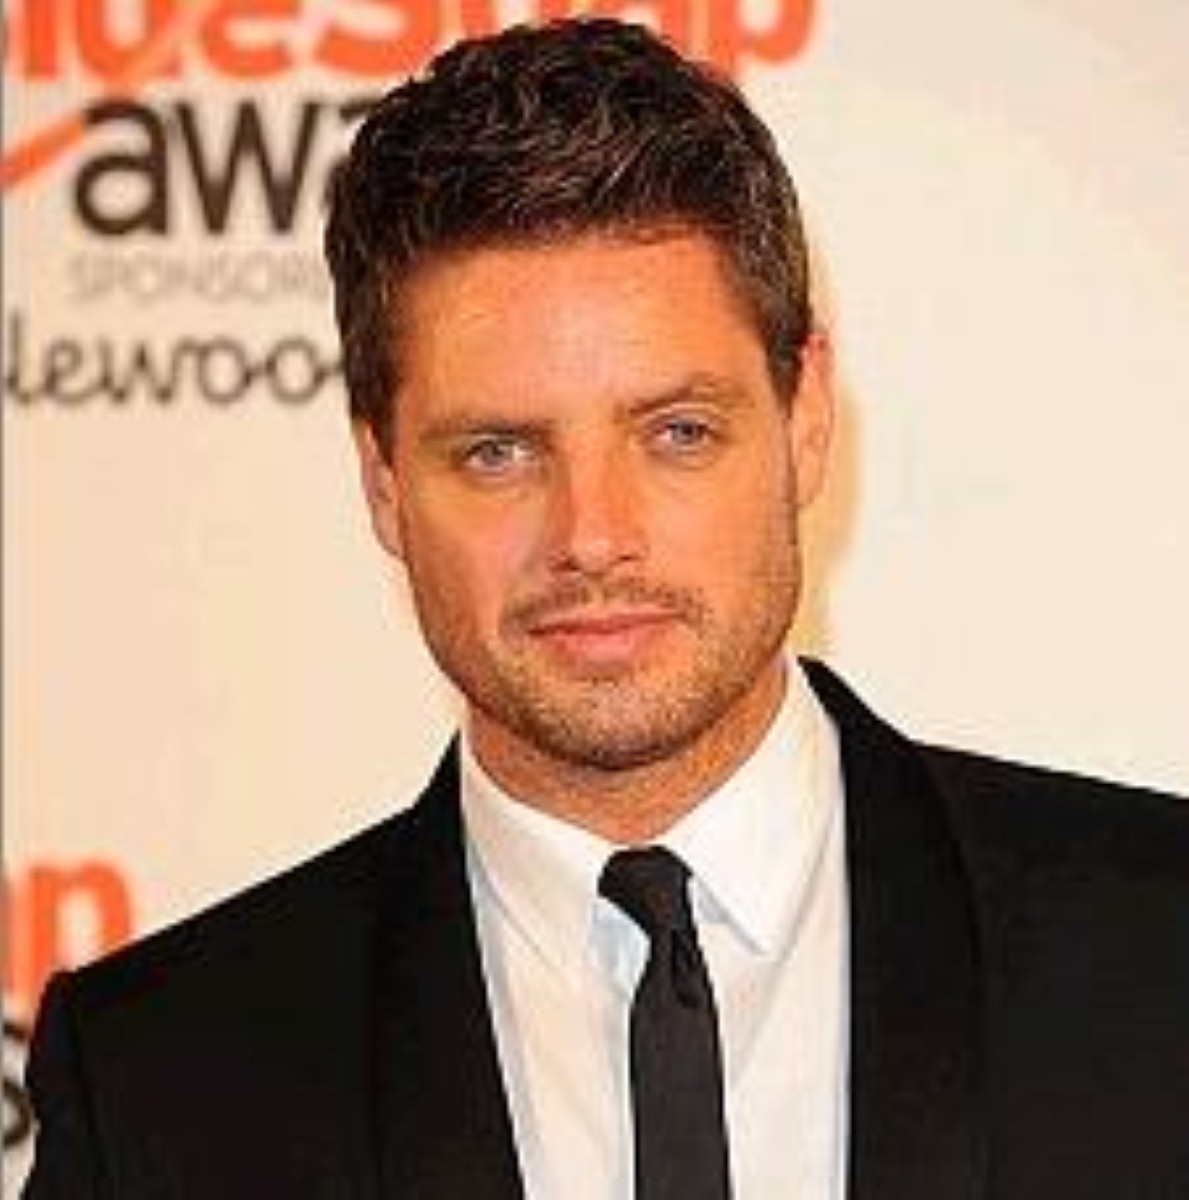 Keith Duffy entertained guests while on holiday at Portuguese caravan rally site